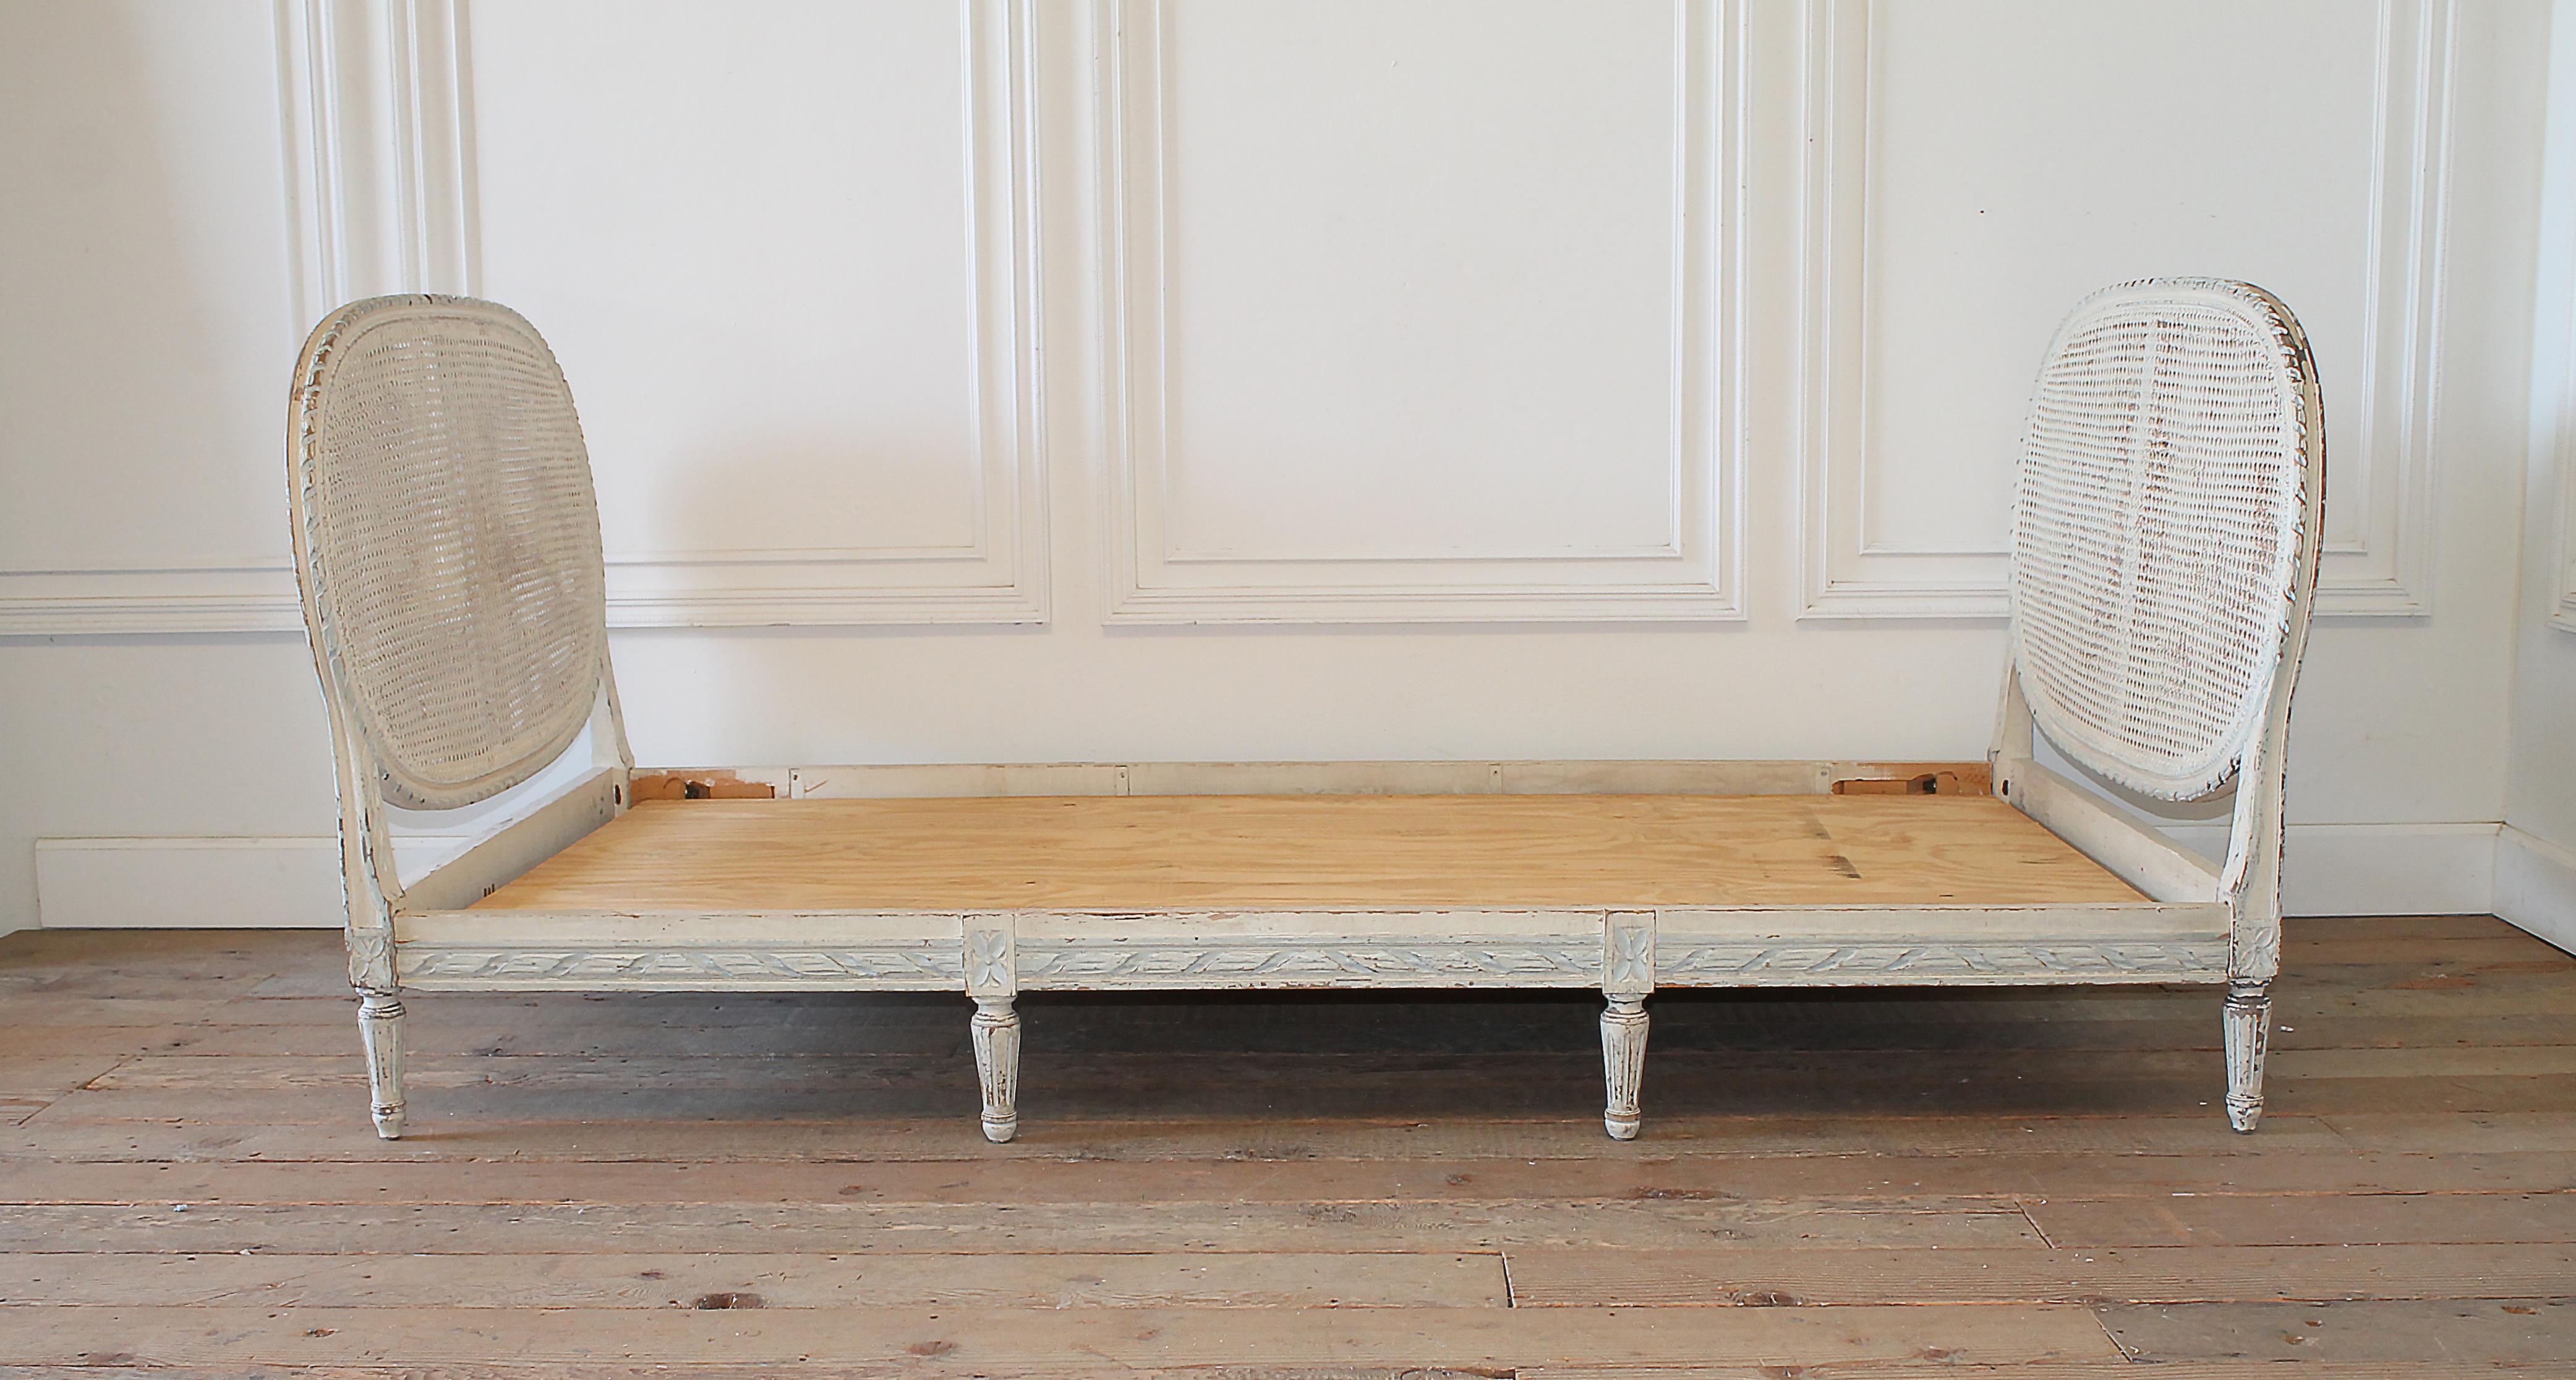 20th century Louis XVI style original painted French cane daybed
Paint is in off-white with antique distressed edges, accent paint colors on carving is a pale grey blue, cane is in good condition. No breaks or damage. The cane has a chippy paint